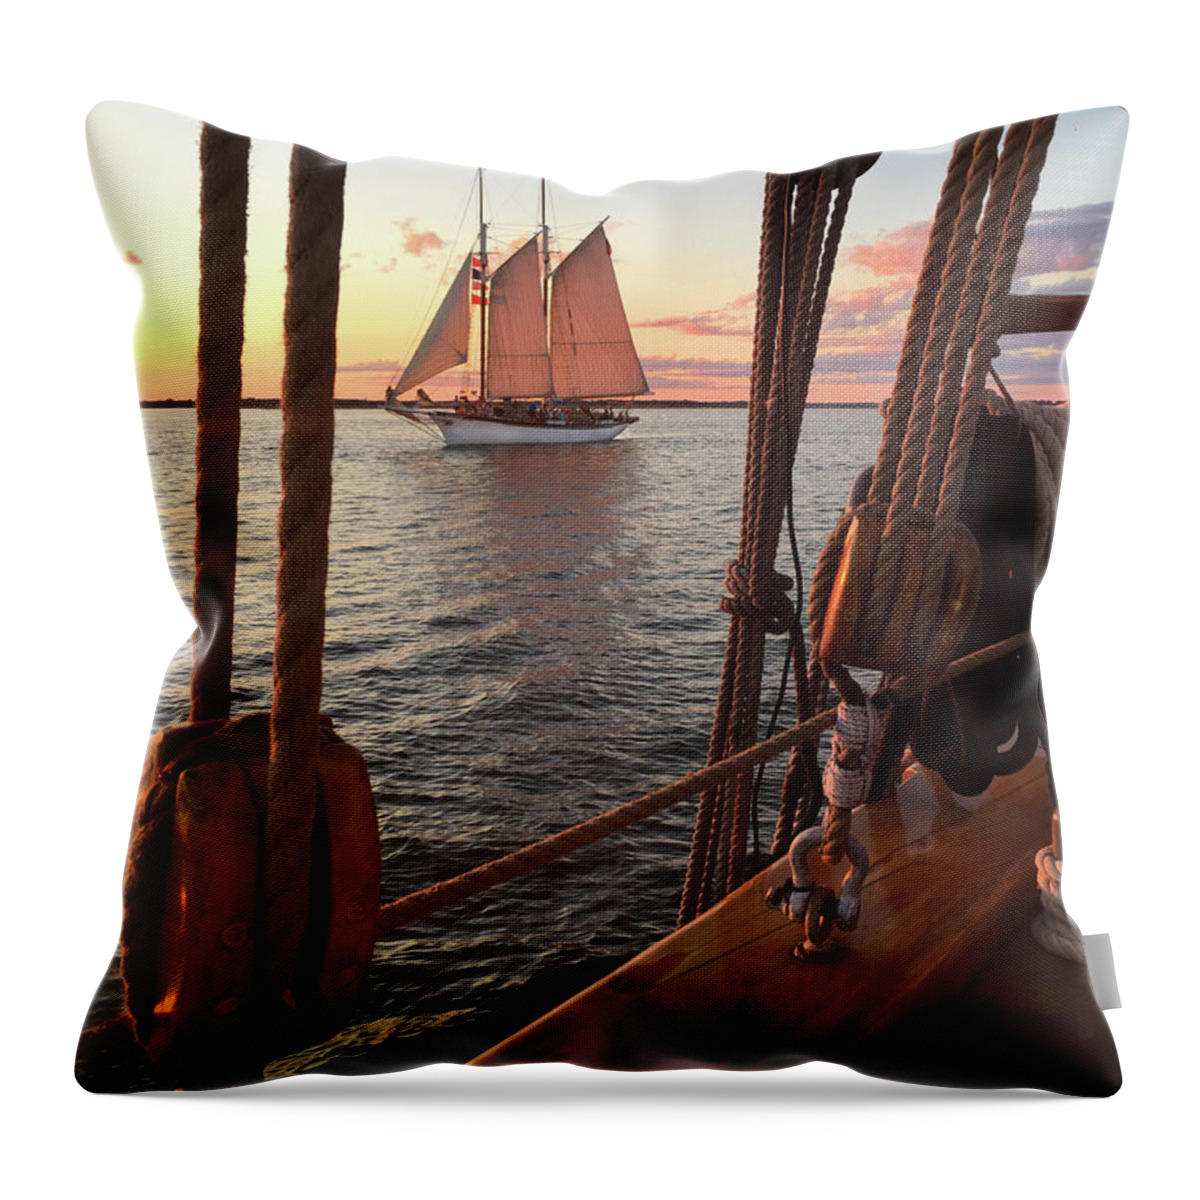 Tall Ships Throw Pillow featuring the photograph Tall Ship Sunset Sail by David T Wilkinson